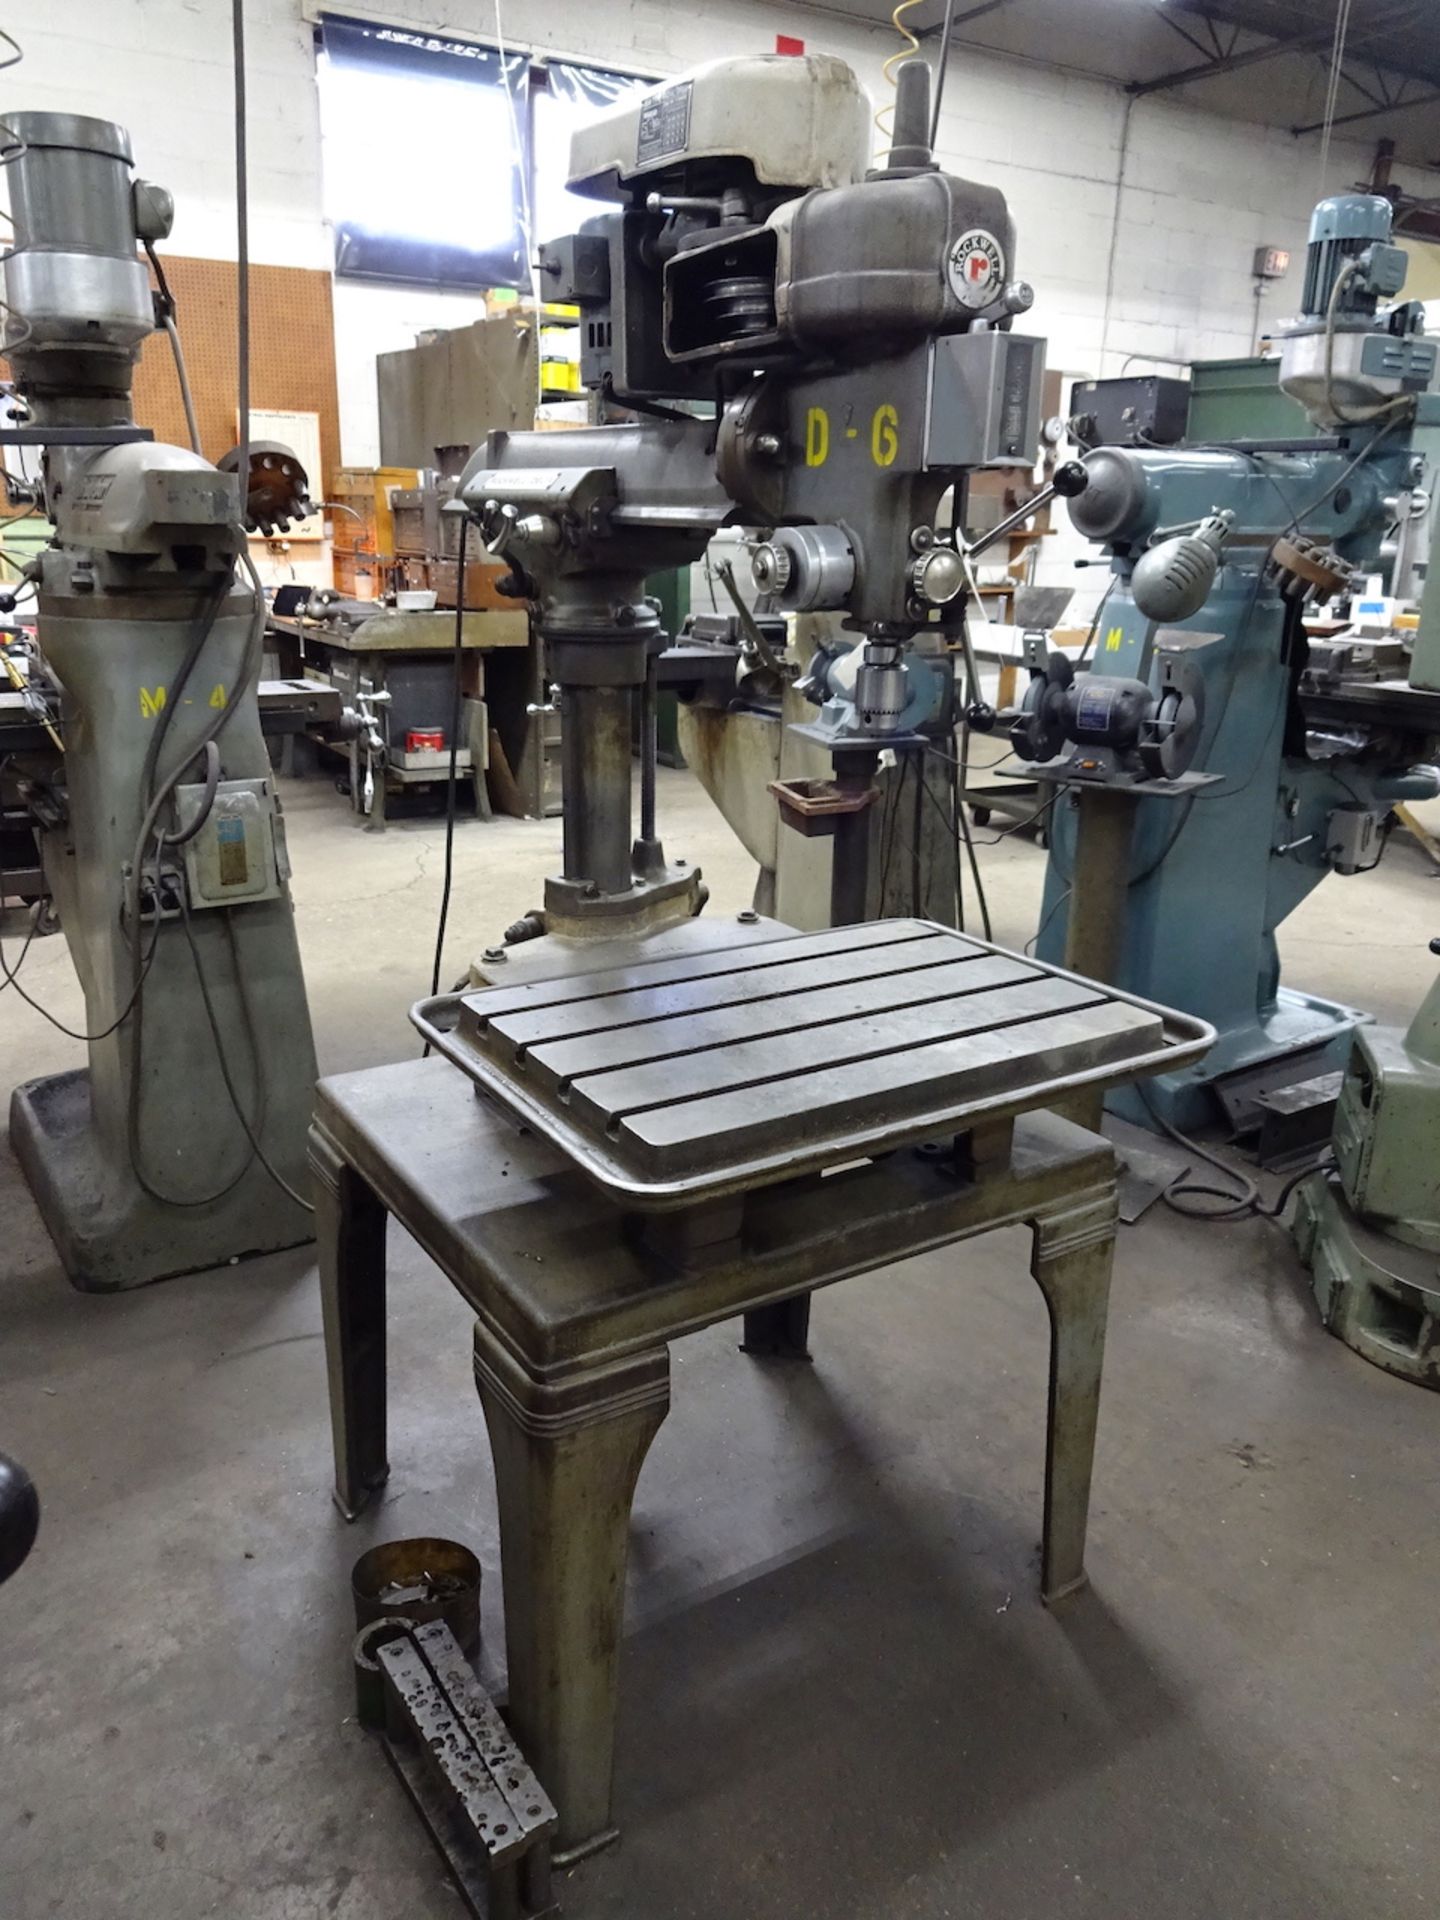 Rockwell Model 15-120 Radial Arm Drill Press, S/N 1470542, 1/2 HP, 26 in. x 18 in. T-Slot Table - Image 2 of 5